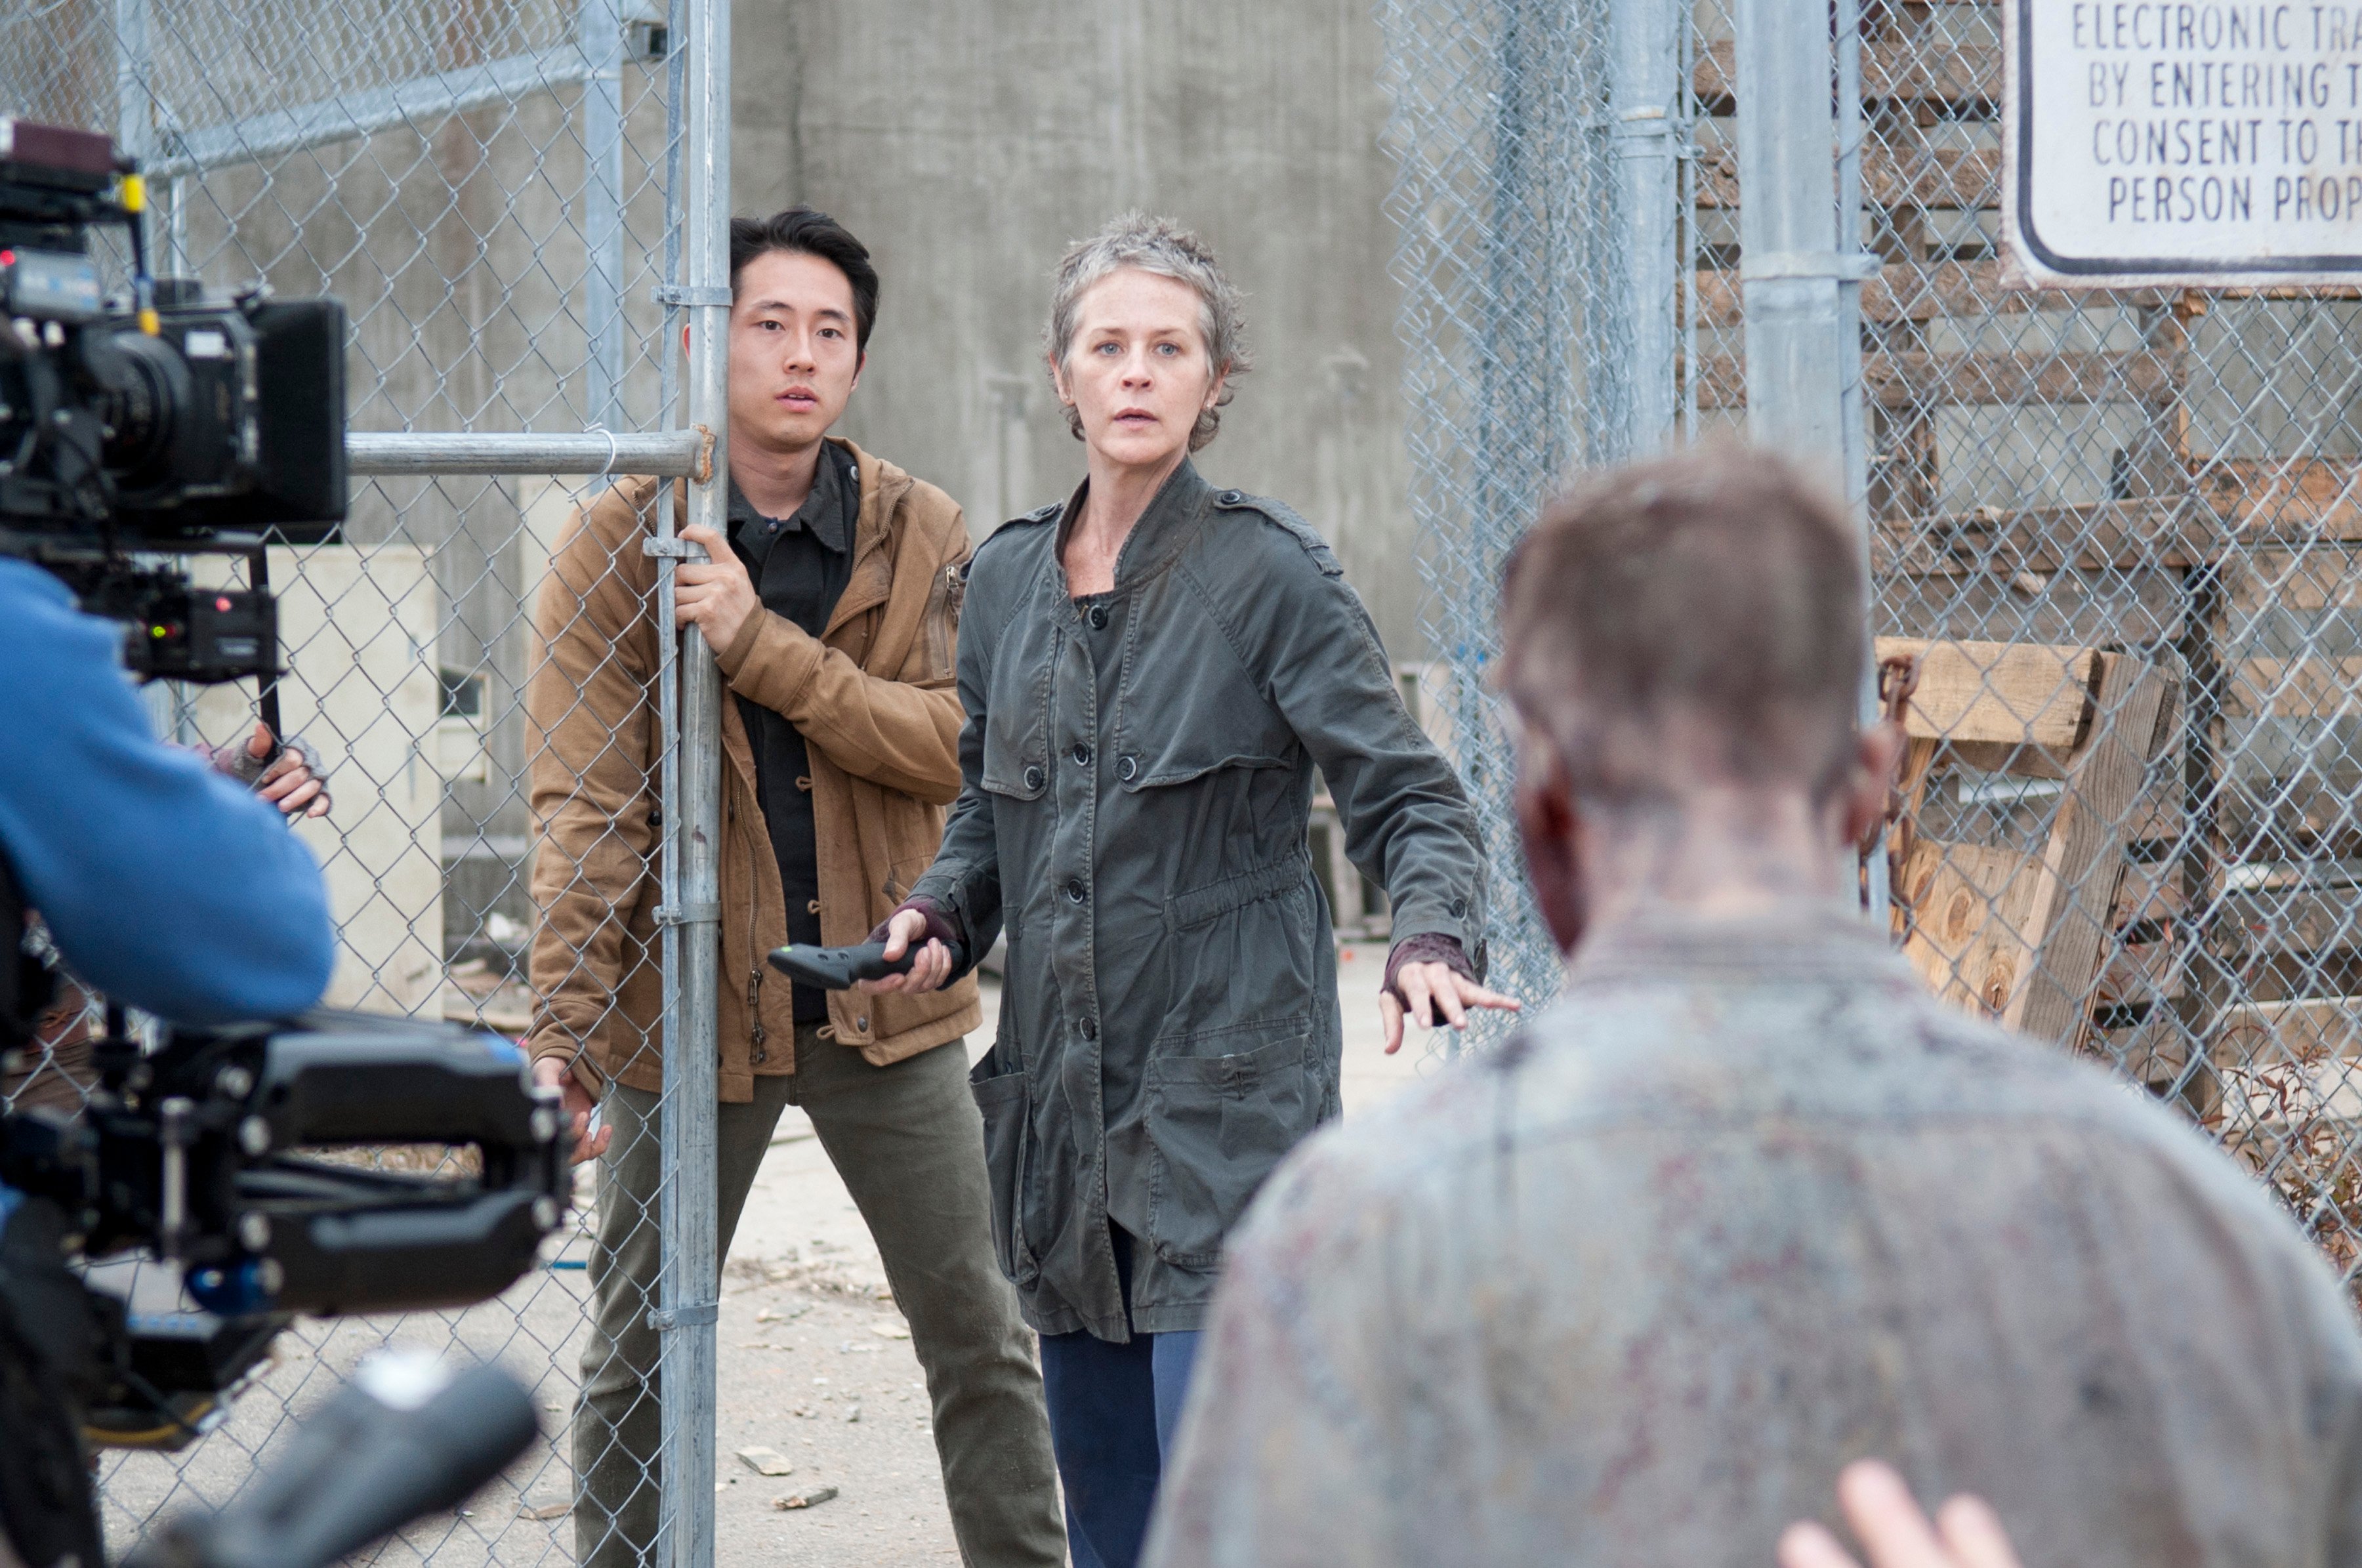 Glenn (Steven Yeun) and Carol (Melissa Suzanne McBride) - The Walking Dead_Season 3, Episode 16_"Welcome to the Tombs" - Photo Credit: Gene Page/AMC